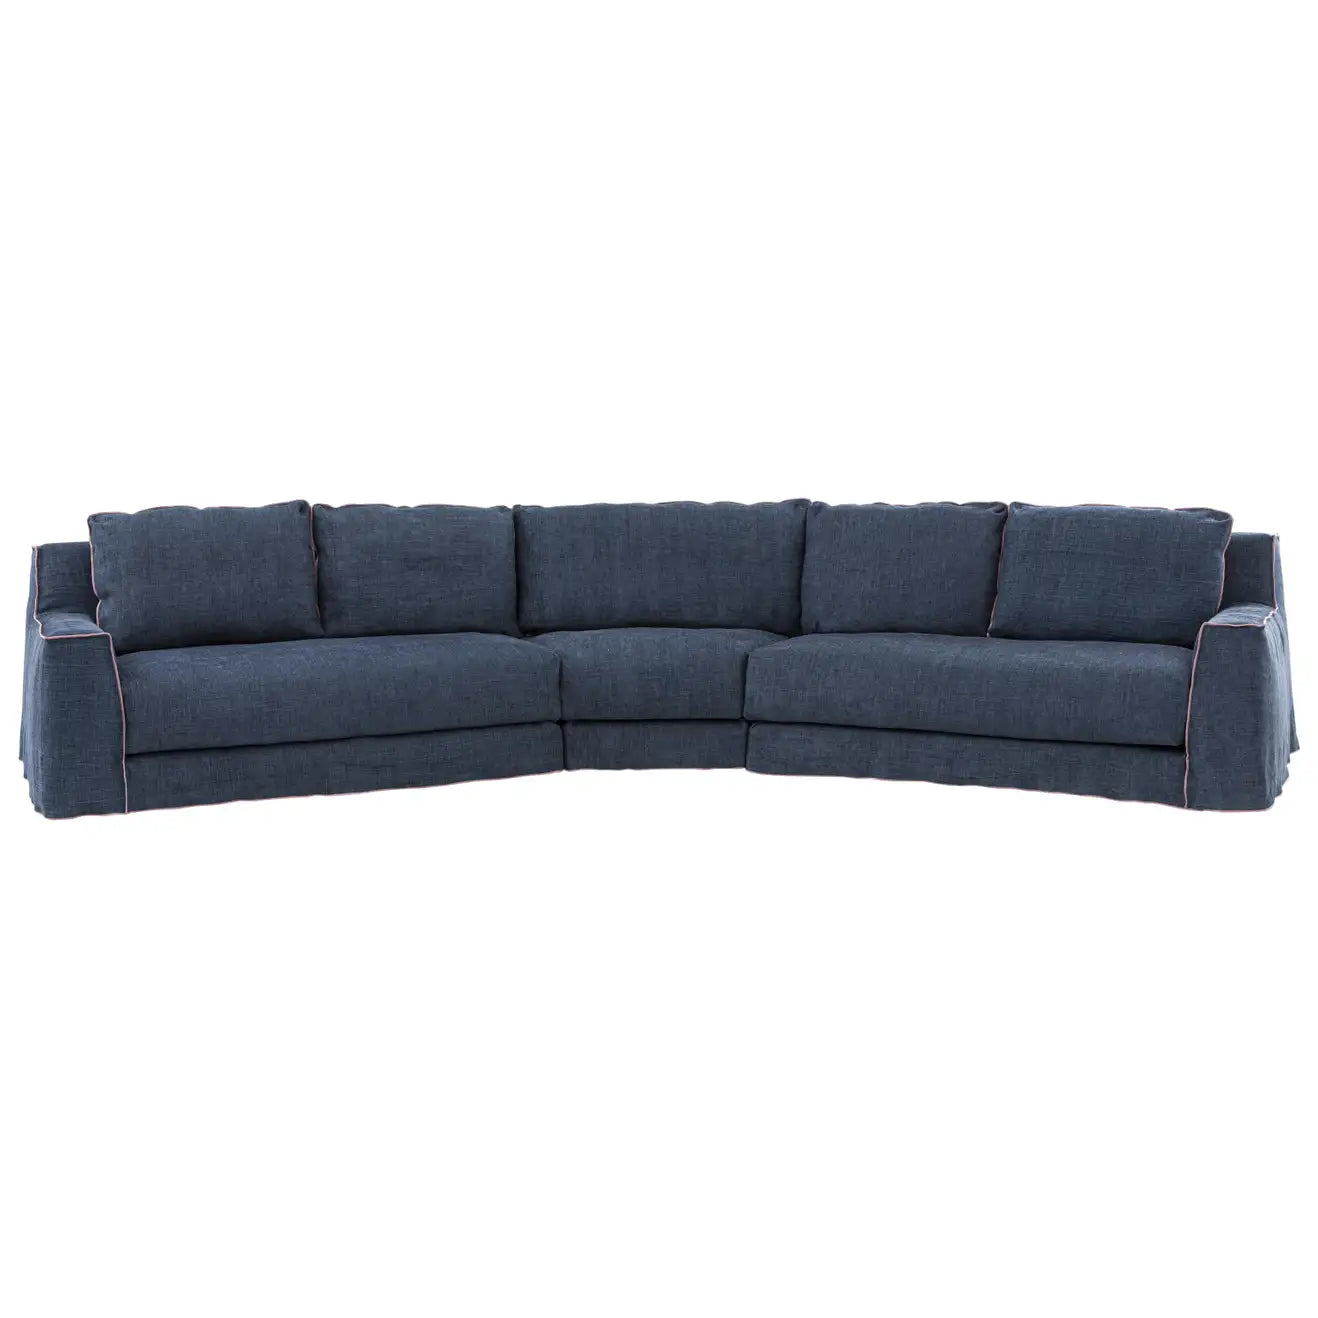 Gervasoni Loll 10 Modular Sofa in Munch Upholstery by Paola Navone $18,700.00